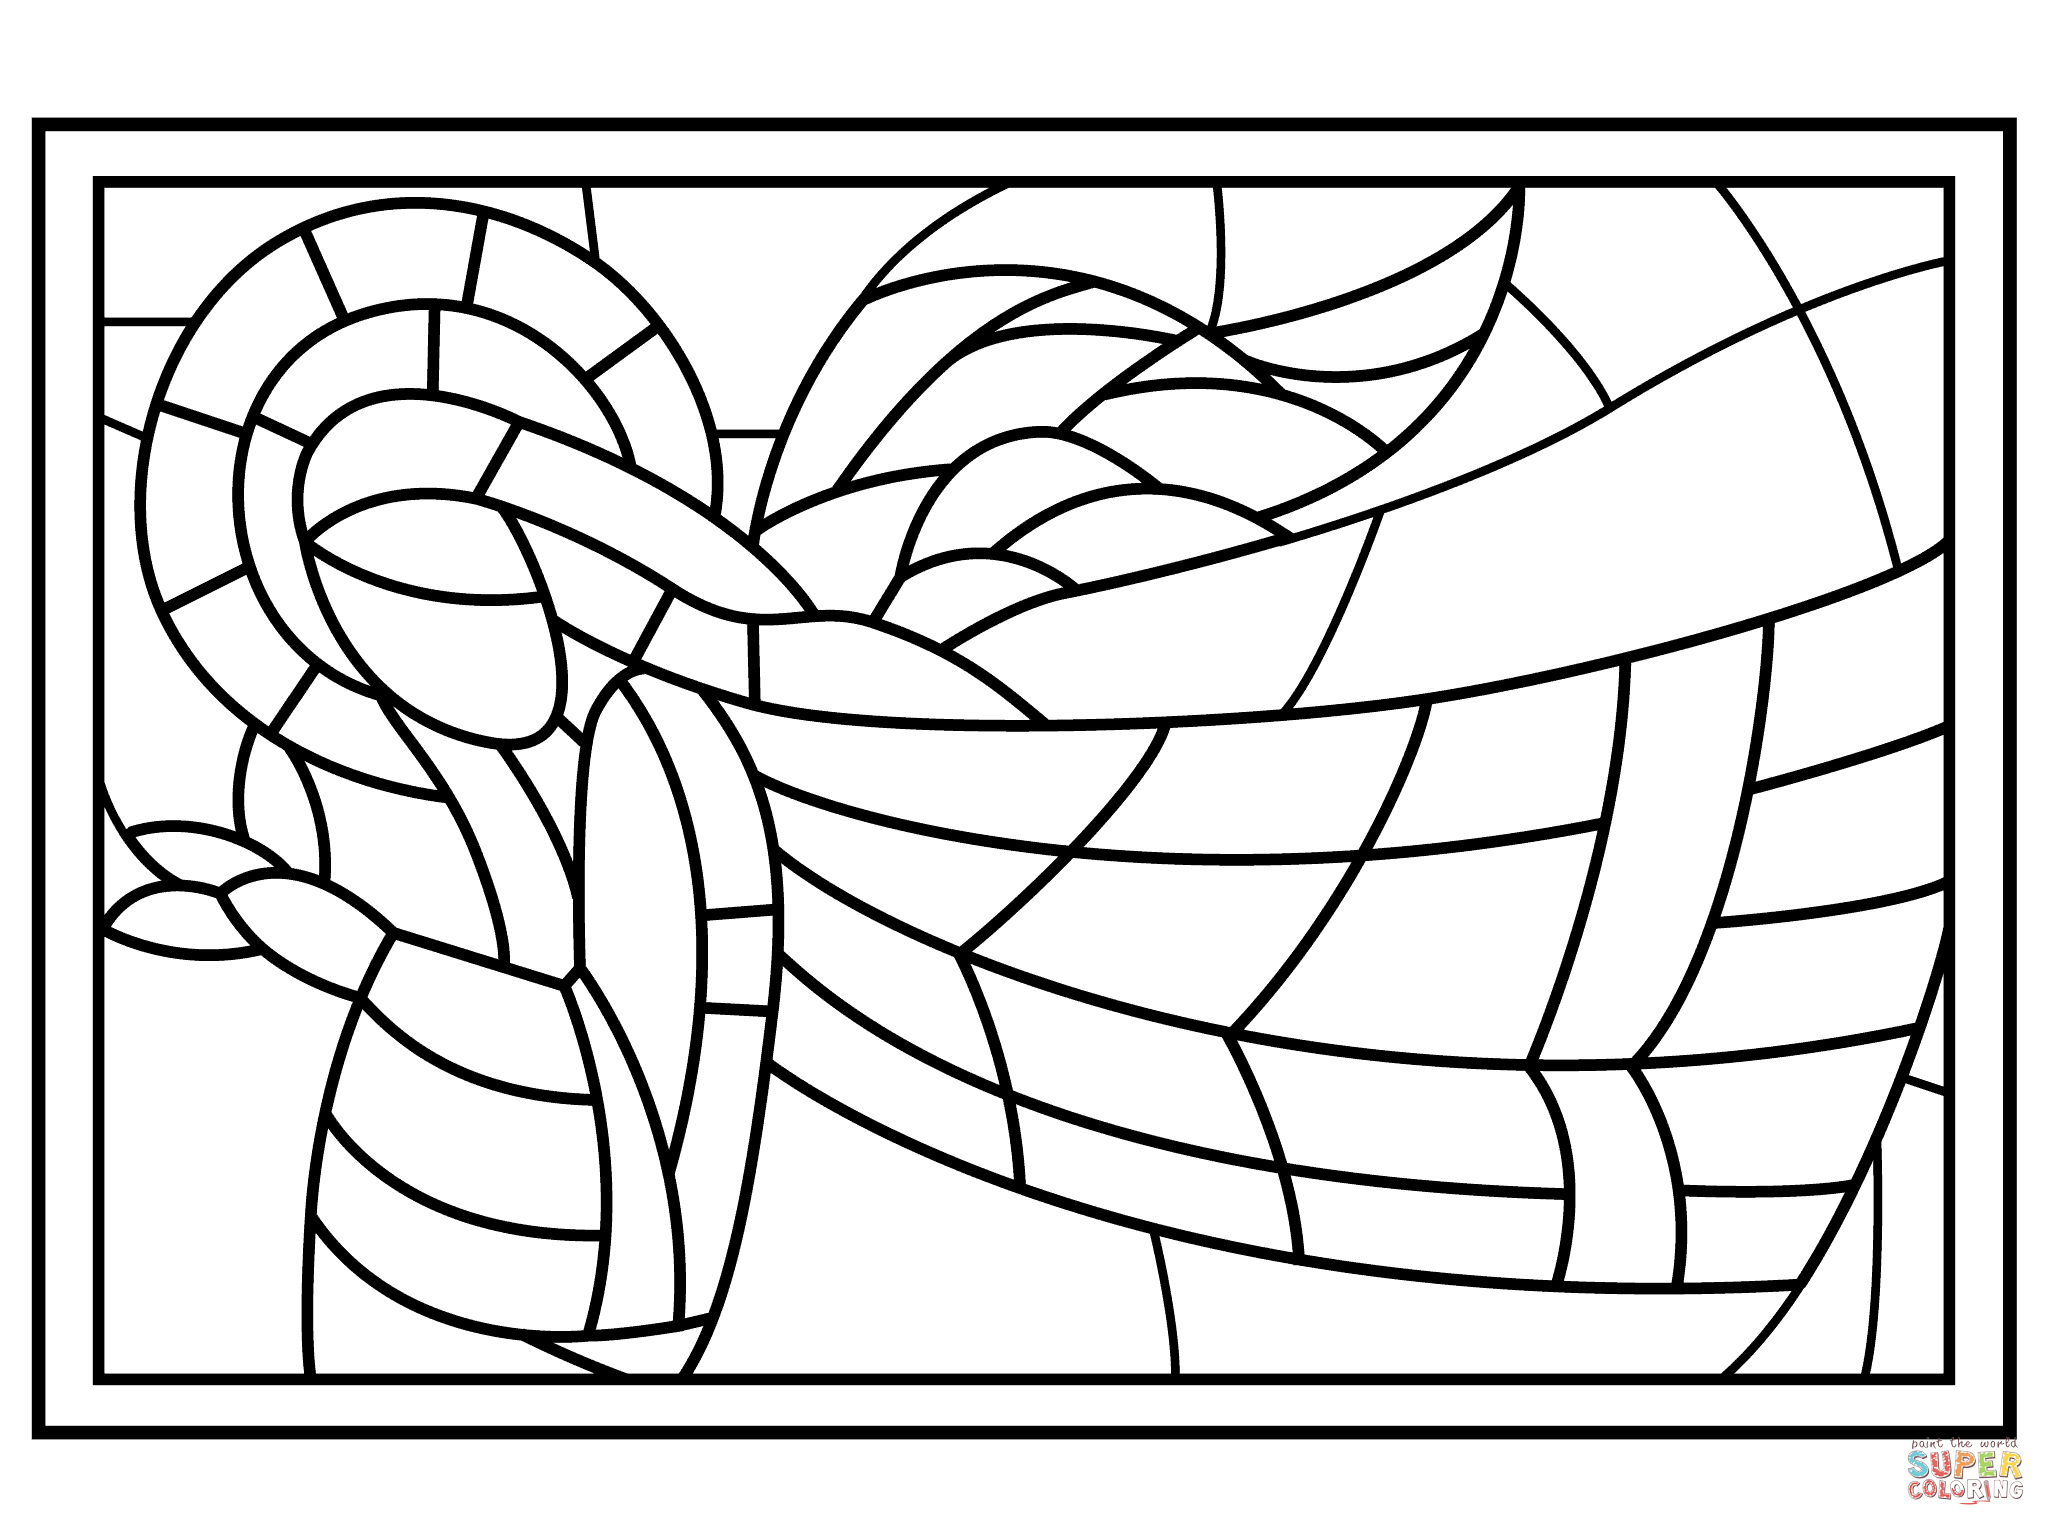 Stained Glass Coloring Pages | Free Coloring Pages - Free Printable Stained Glass Patterns